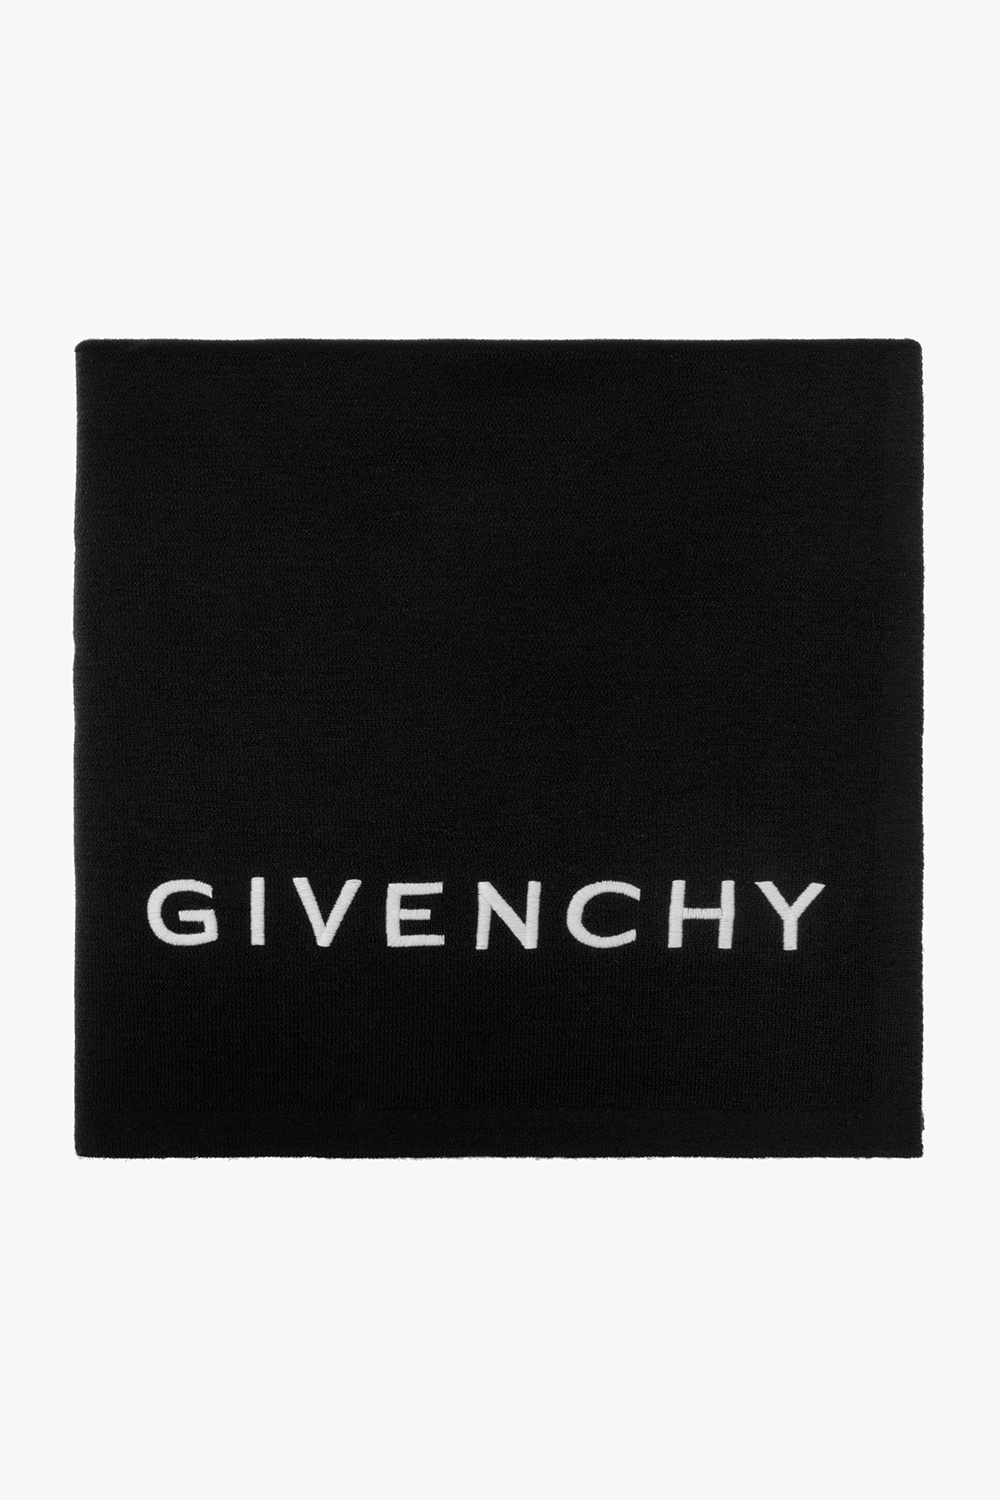 Givenchy monumental mallow shoes givenchy shoes